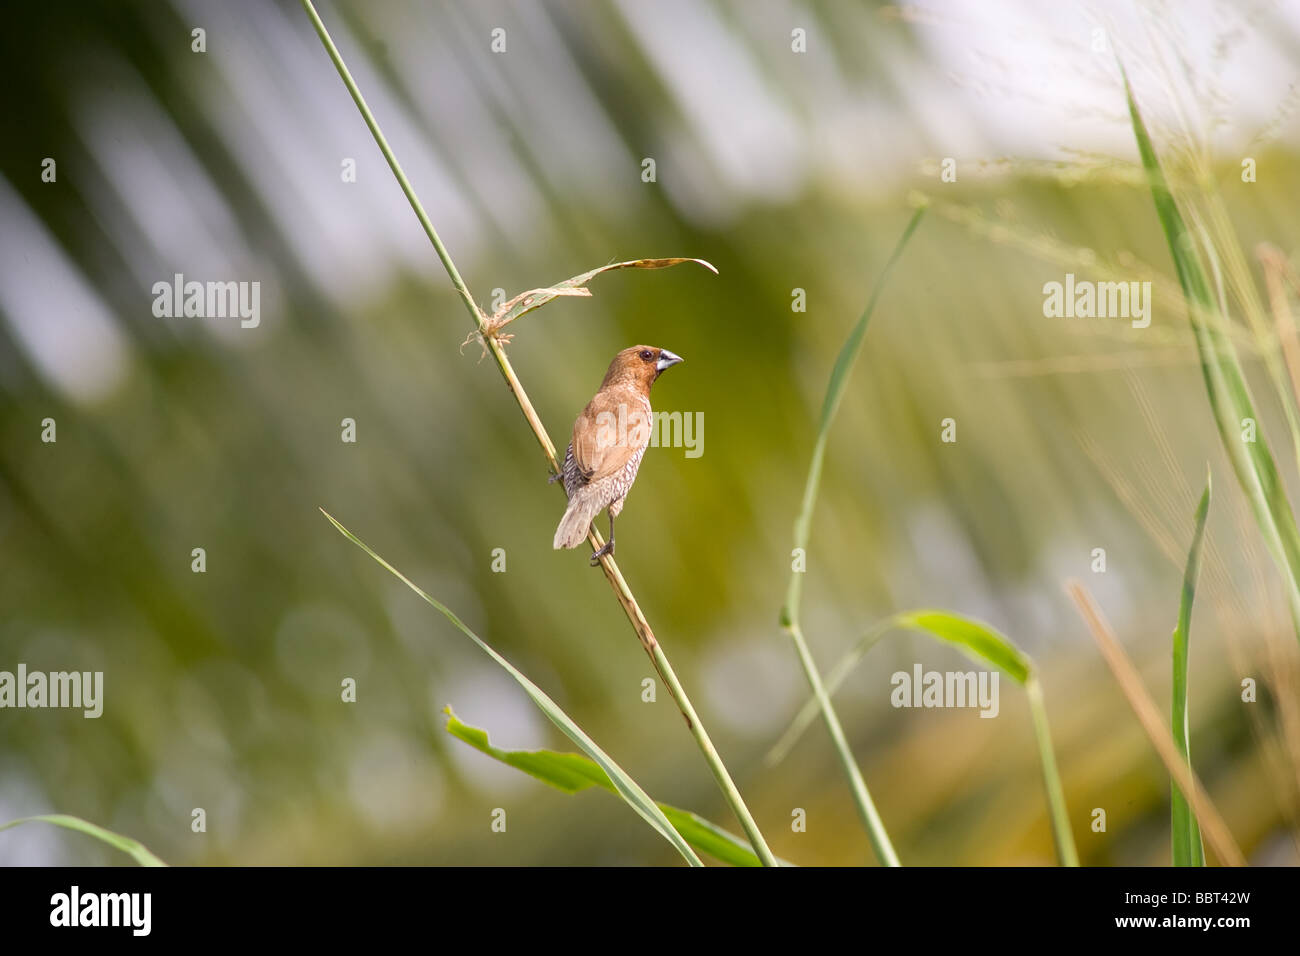 A common bird as seen in Malaysian tropical rainforests Stock Photo